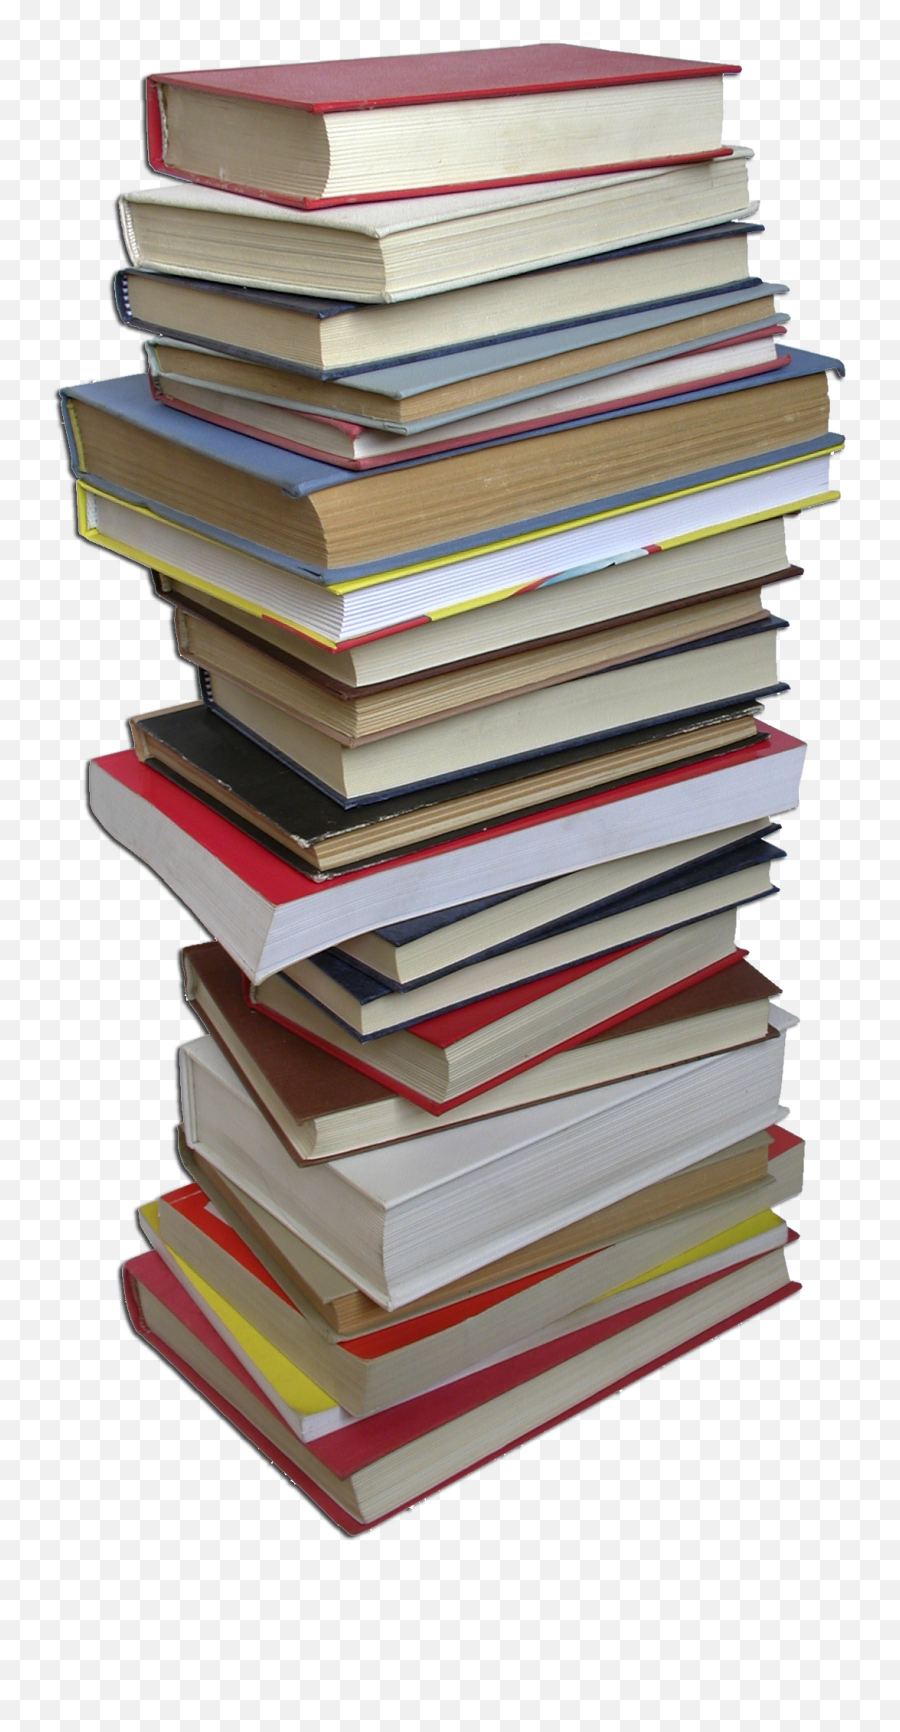 Used Book Donation Bookselling Charitable Organization - Stack Of Books Emoji,Stack Of Books Emoji